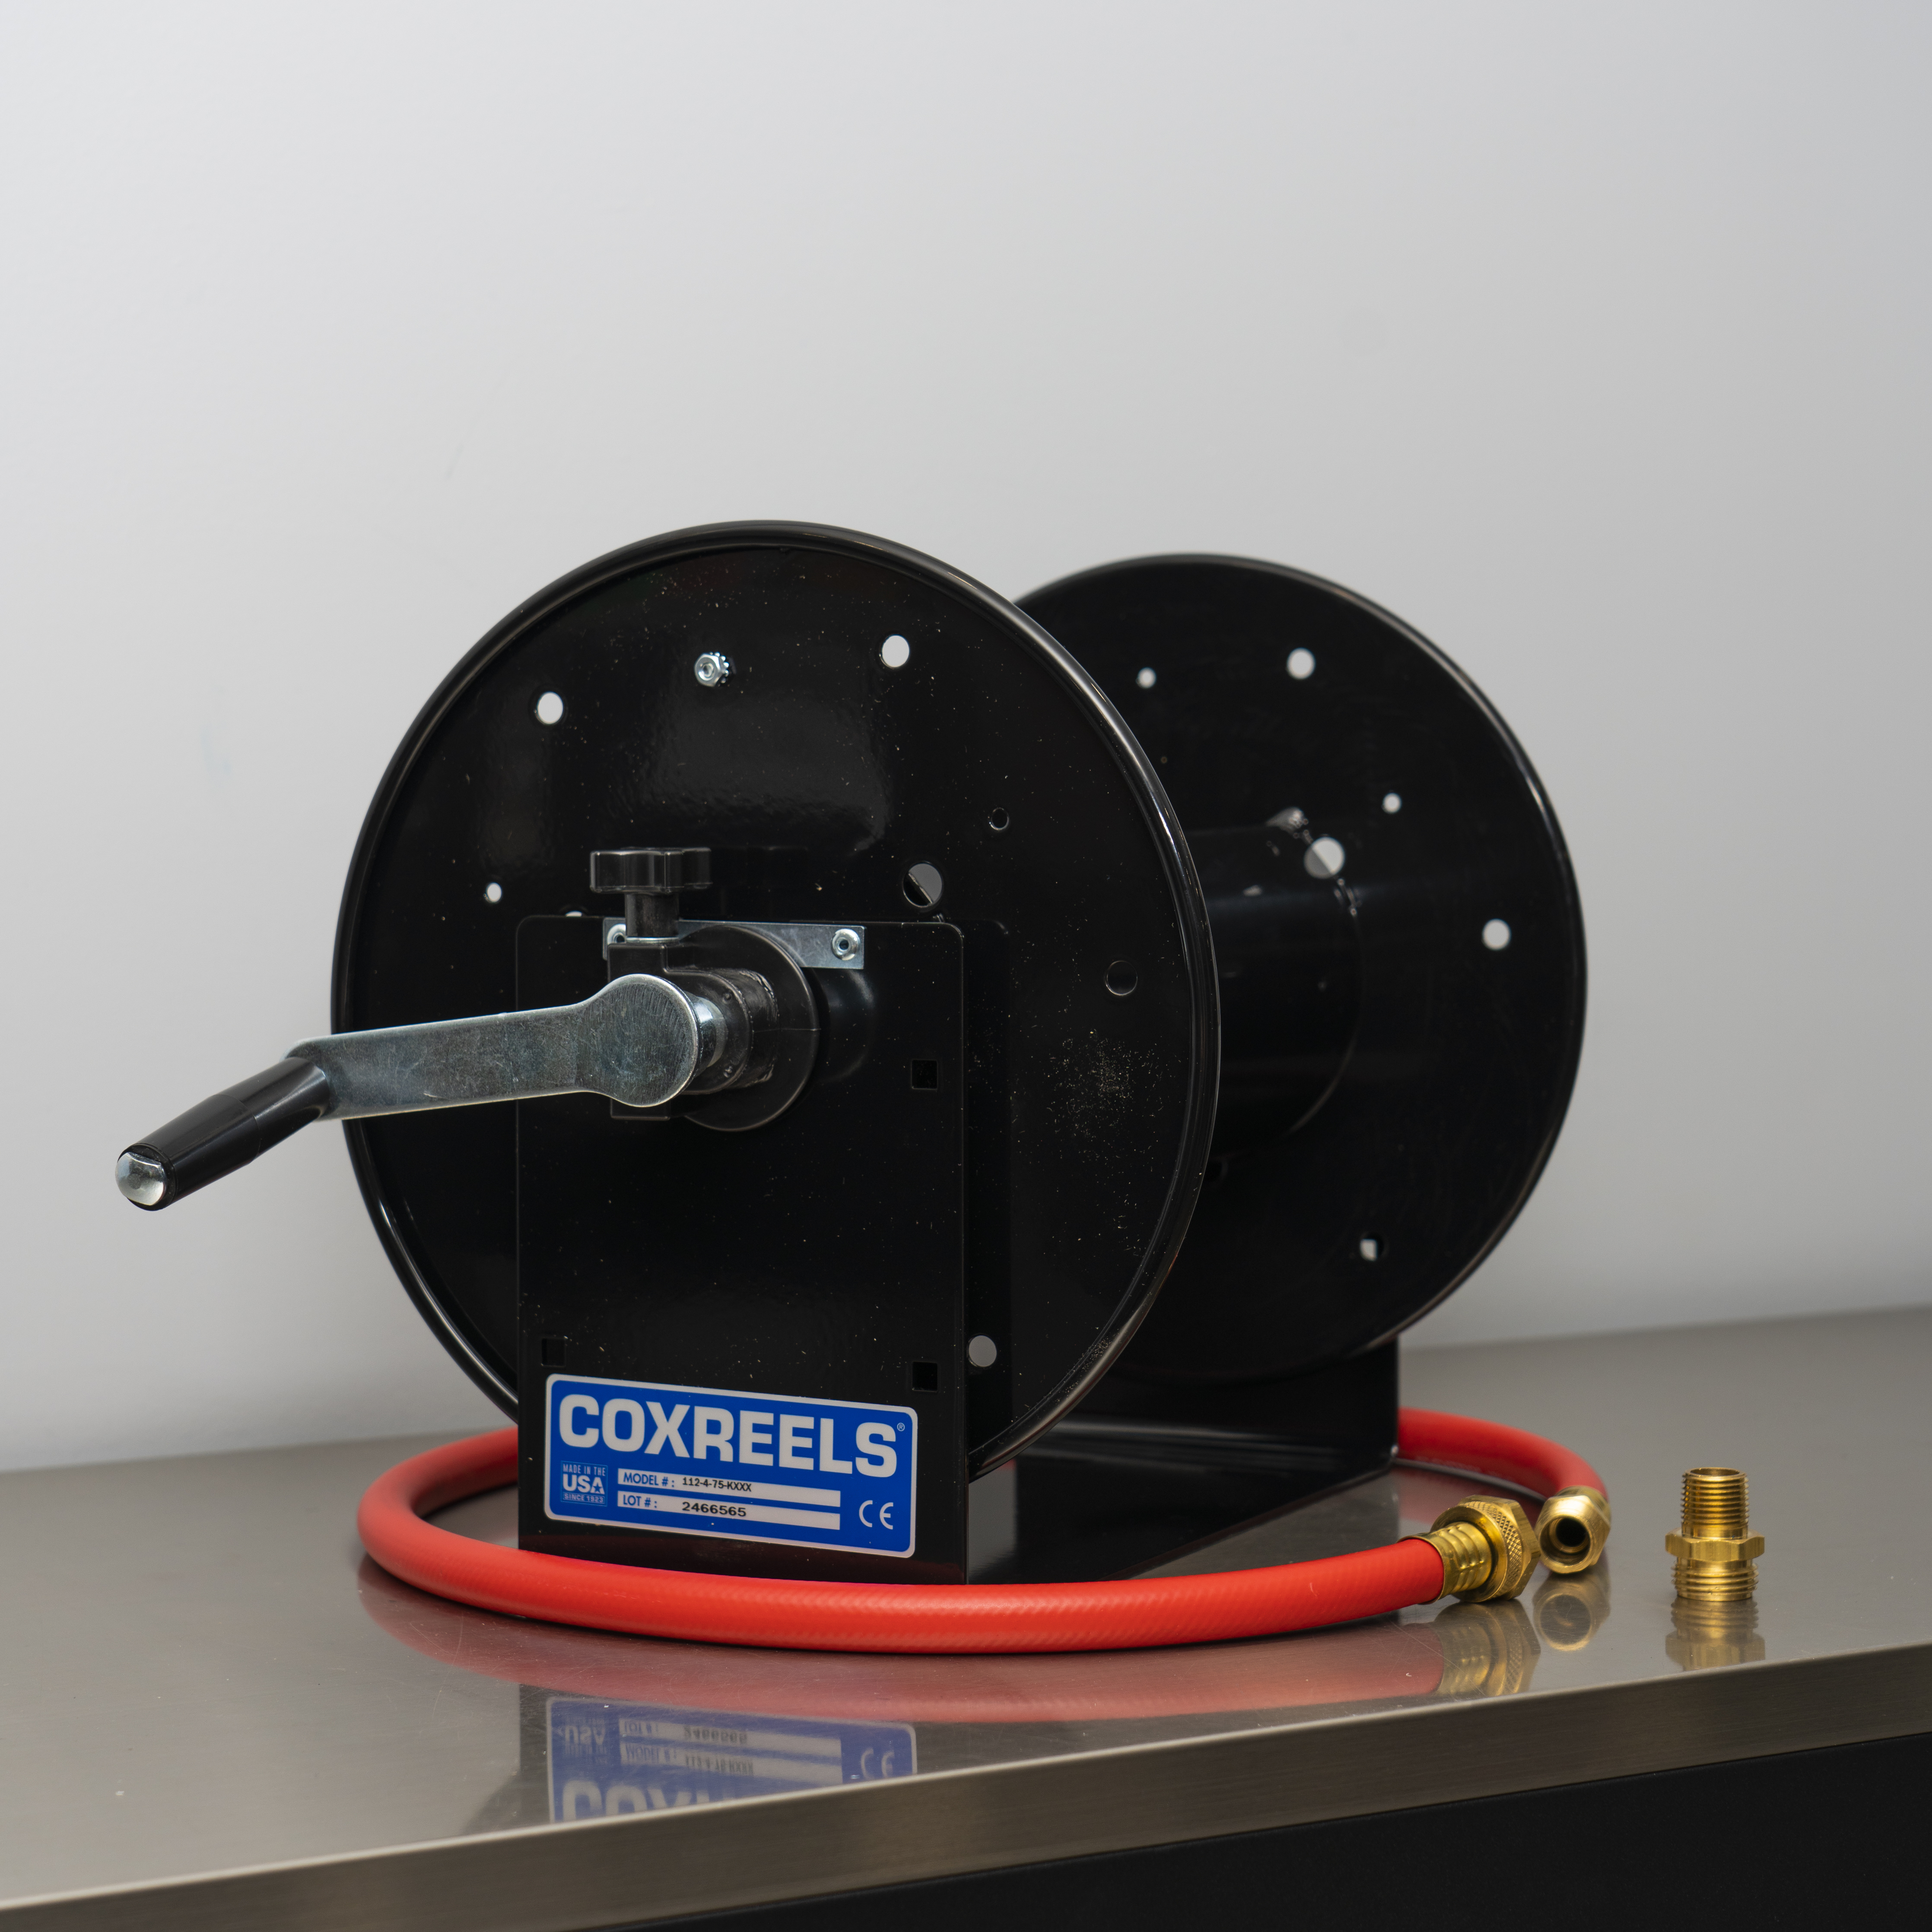 New Cox Reel Kits for Garden Hoses! - The Clean Garage